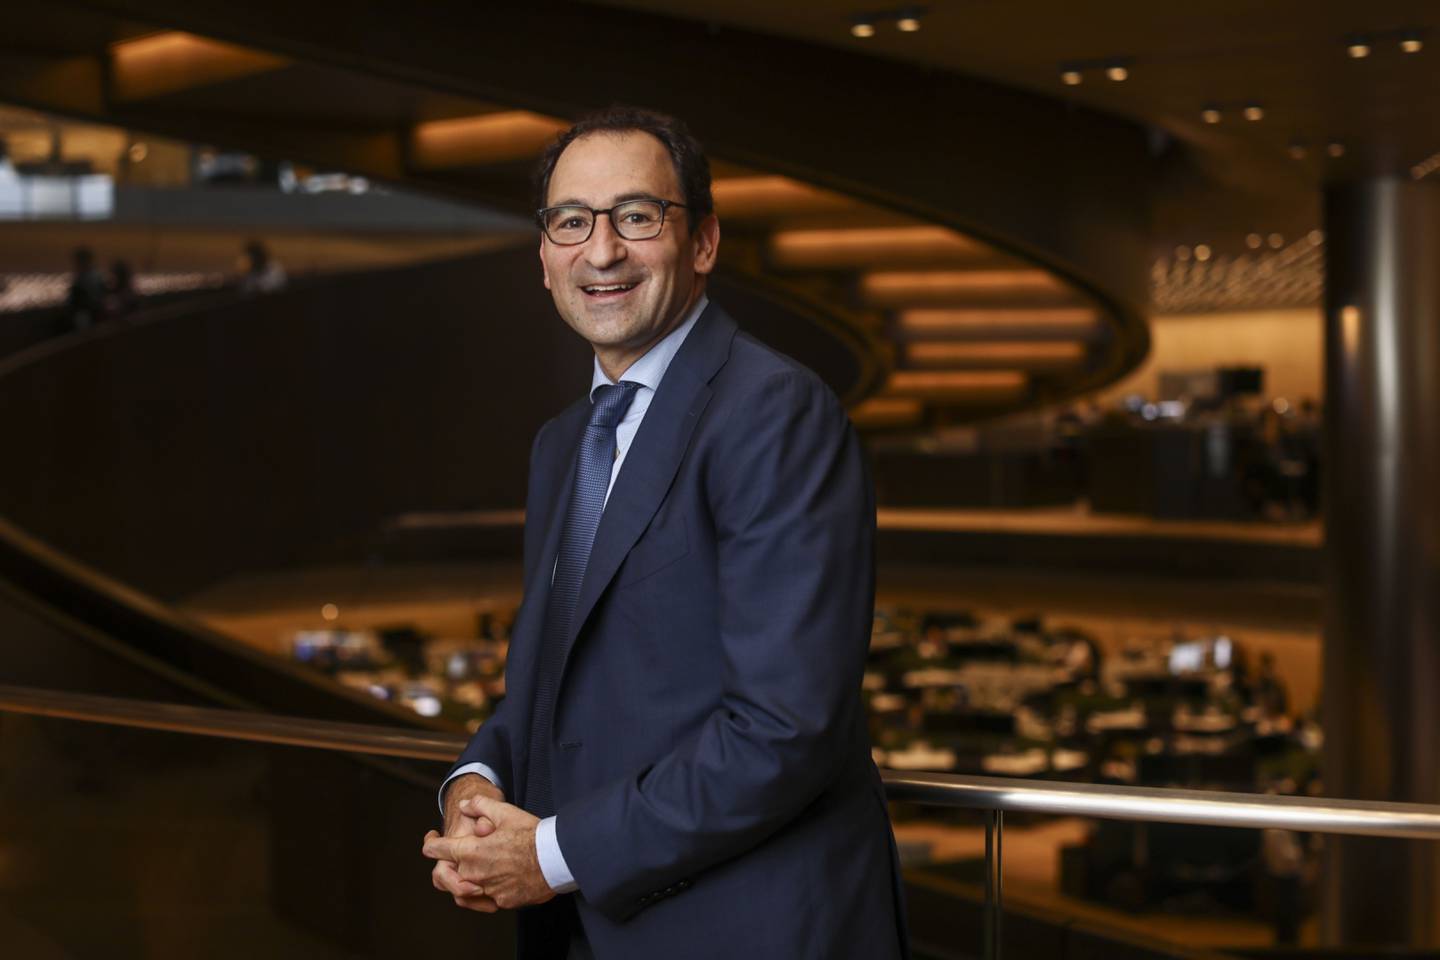 Jonathan Gray, president of Blackstone Group, joined the ranks of the world’s 500 wealthiest people as shares of the alternative asset manager soared amid a flurry of deal making. Photo: Bloomberg